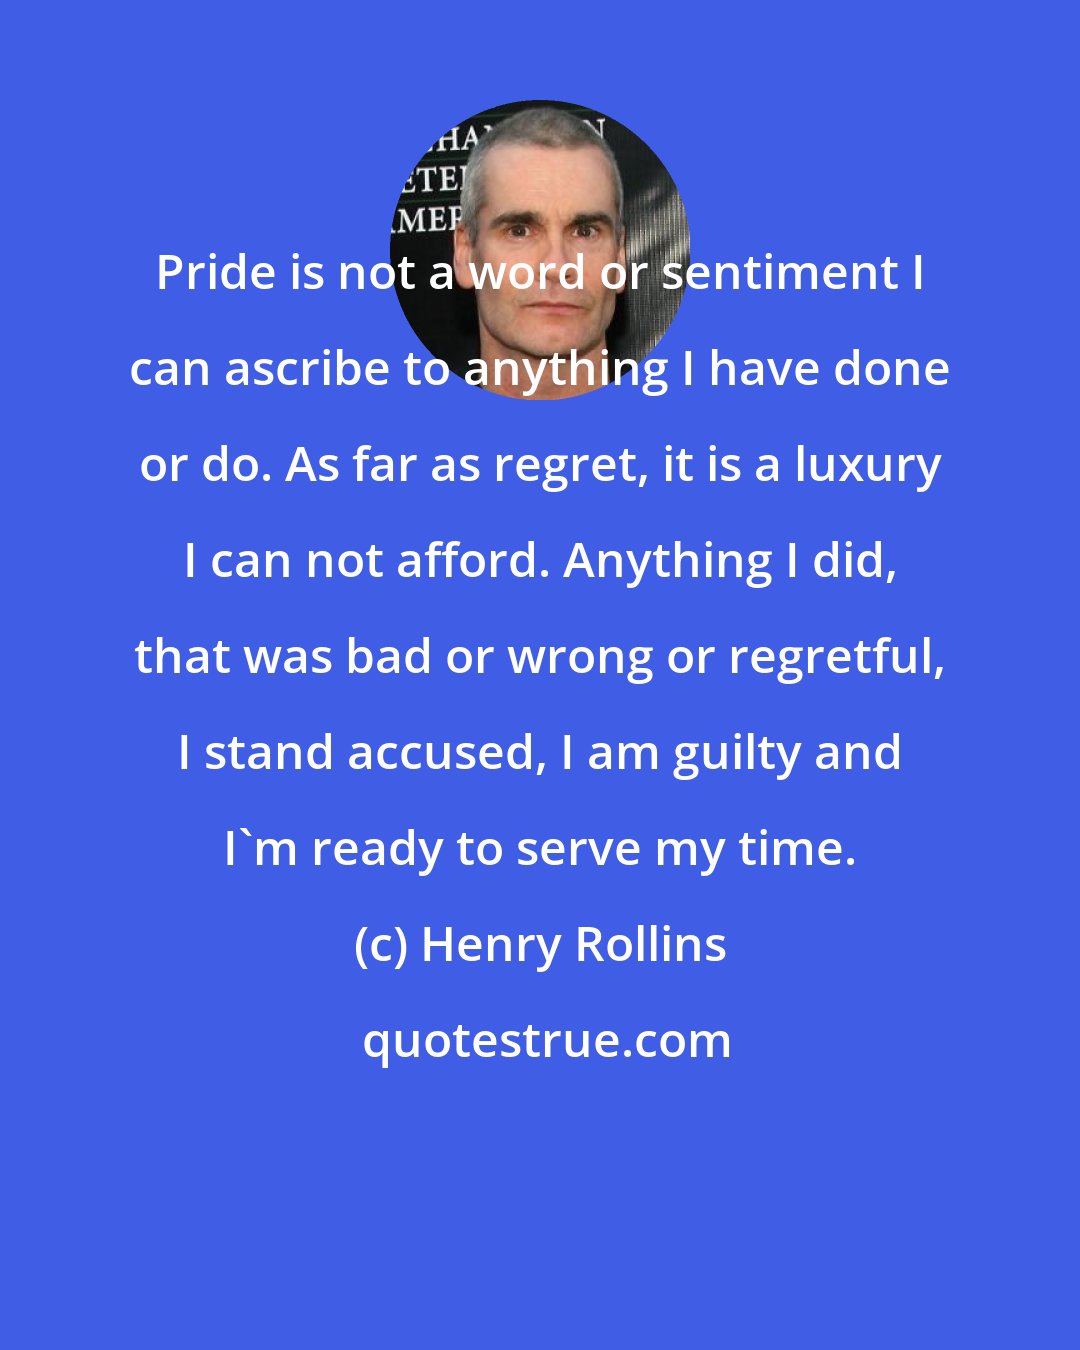 Henry Rollins: Pride is not a word or sentiment I can ascribe to anything I have done or do. As far as regret, it is a luxury I can not afford. Anything I did, that was bad or wrong or regretful, I stand accused, I am guilty and I'm ready to serve my time.